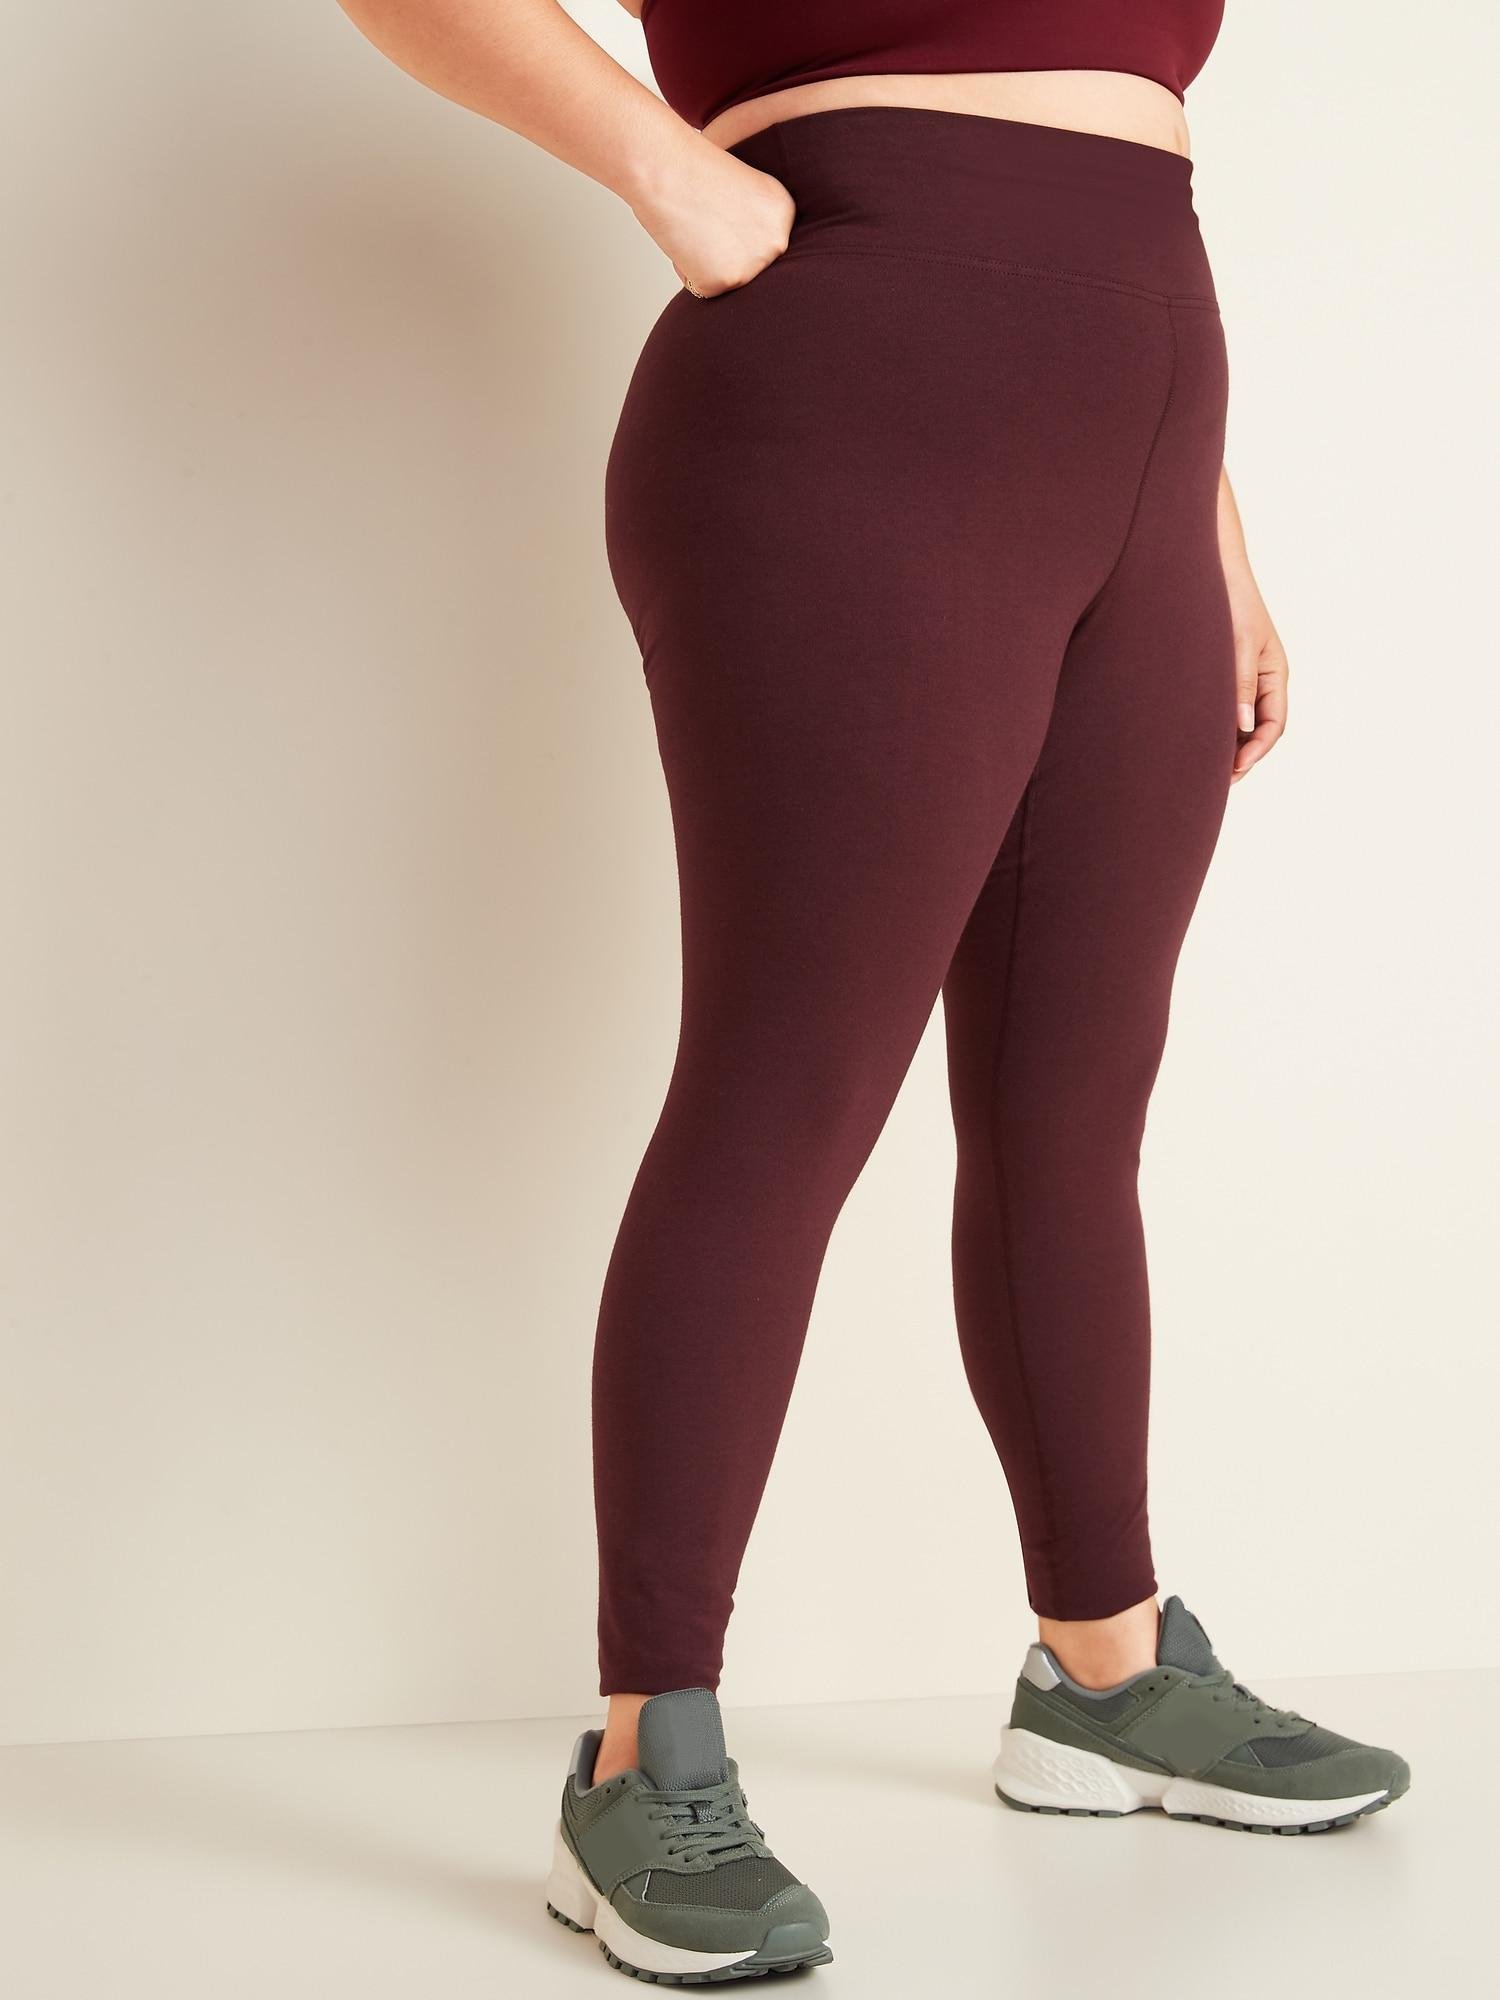 H&m Maternity Gym Leggings With